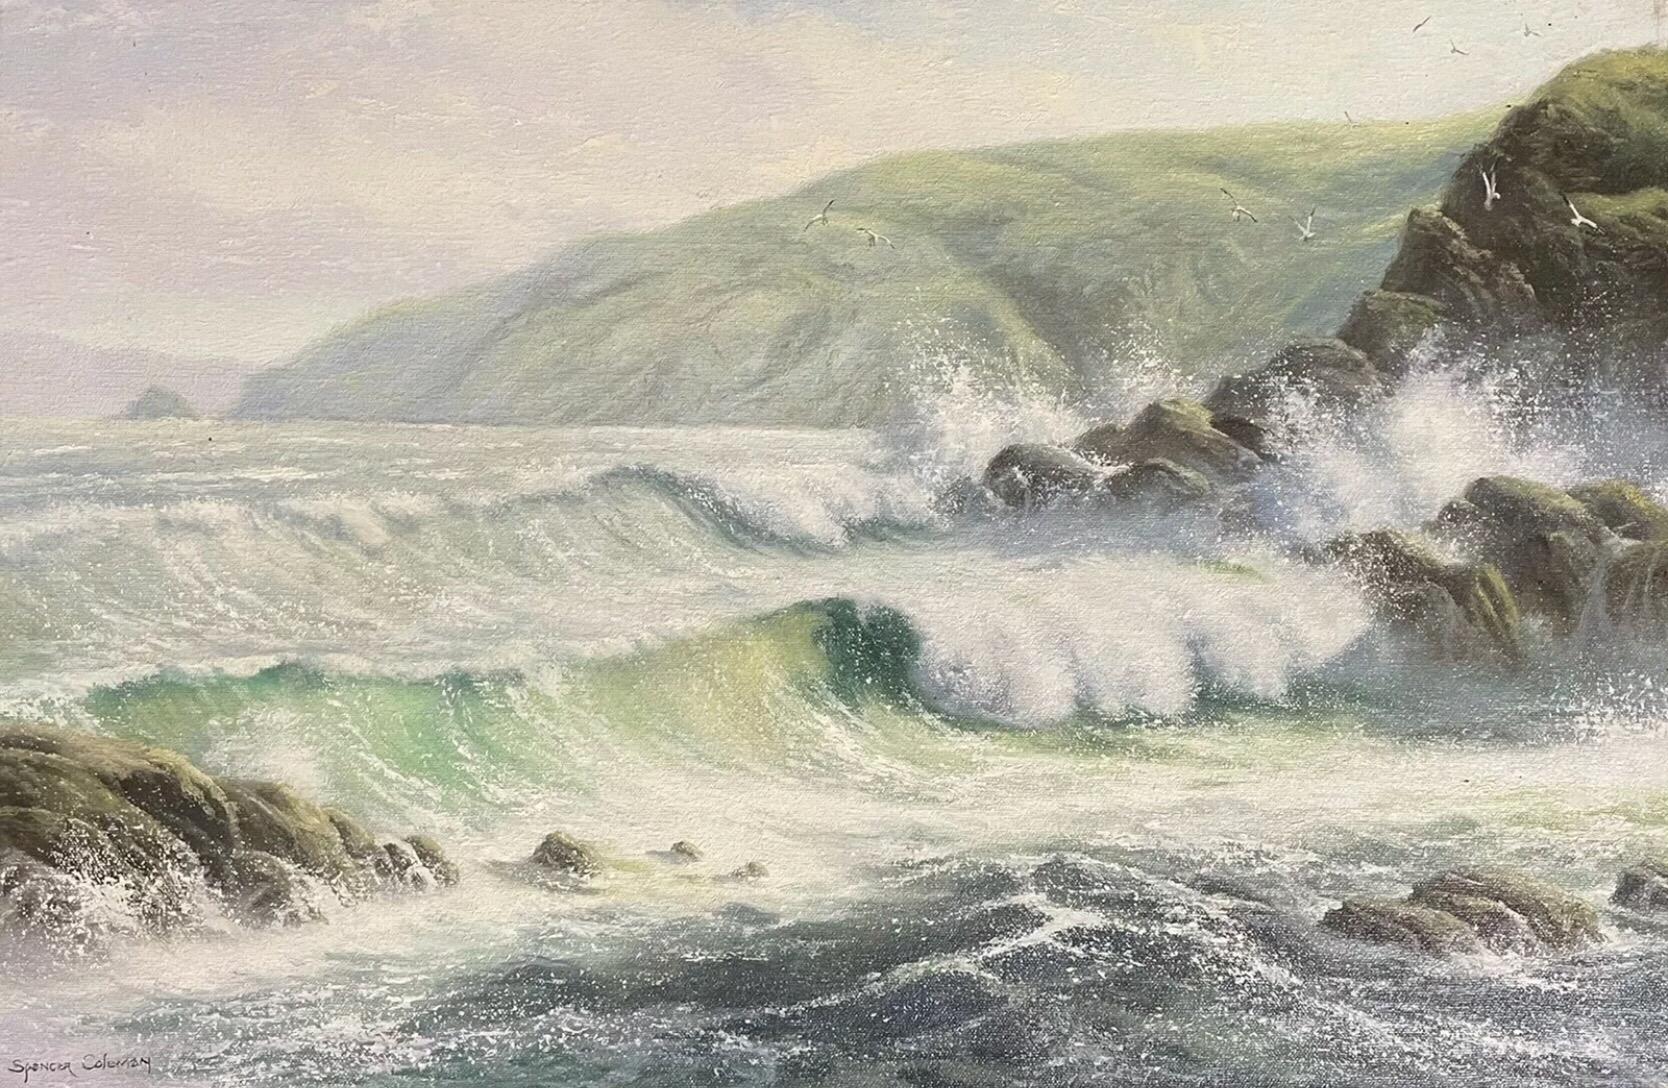 Artist/ School: Martin Spencer Coleman (British b.1952), signed

Title: Crashing Waves

Medium: oil painting on canvas, unframed

Size: painting: 16 x 24 inches

Provenance: private collection, England. 

Condition: The painting is in very good and